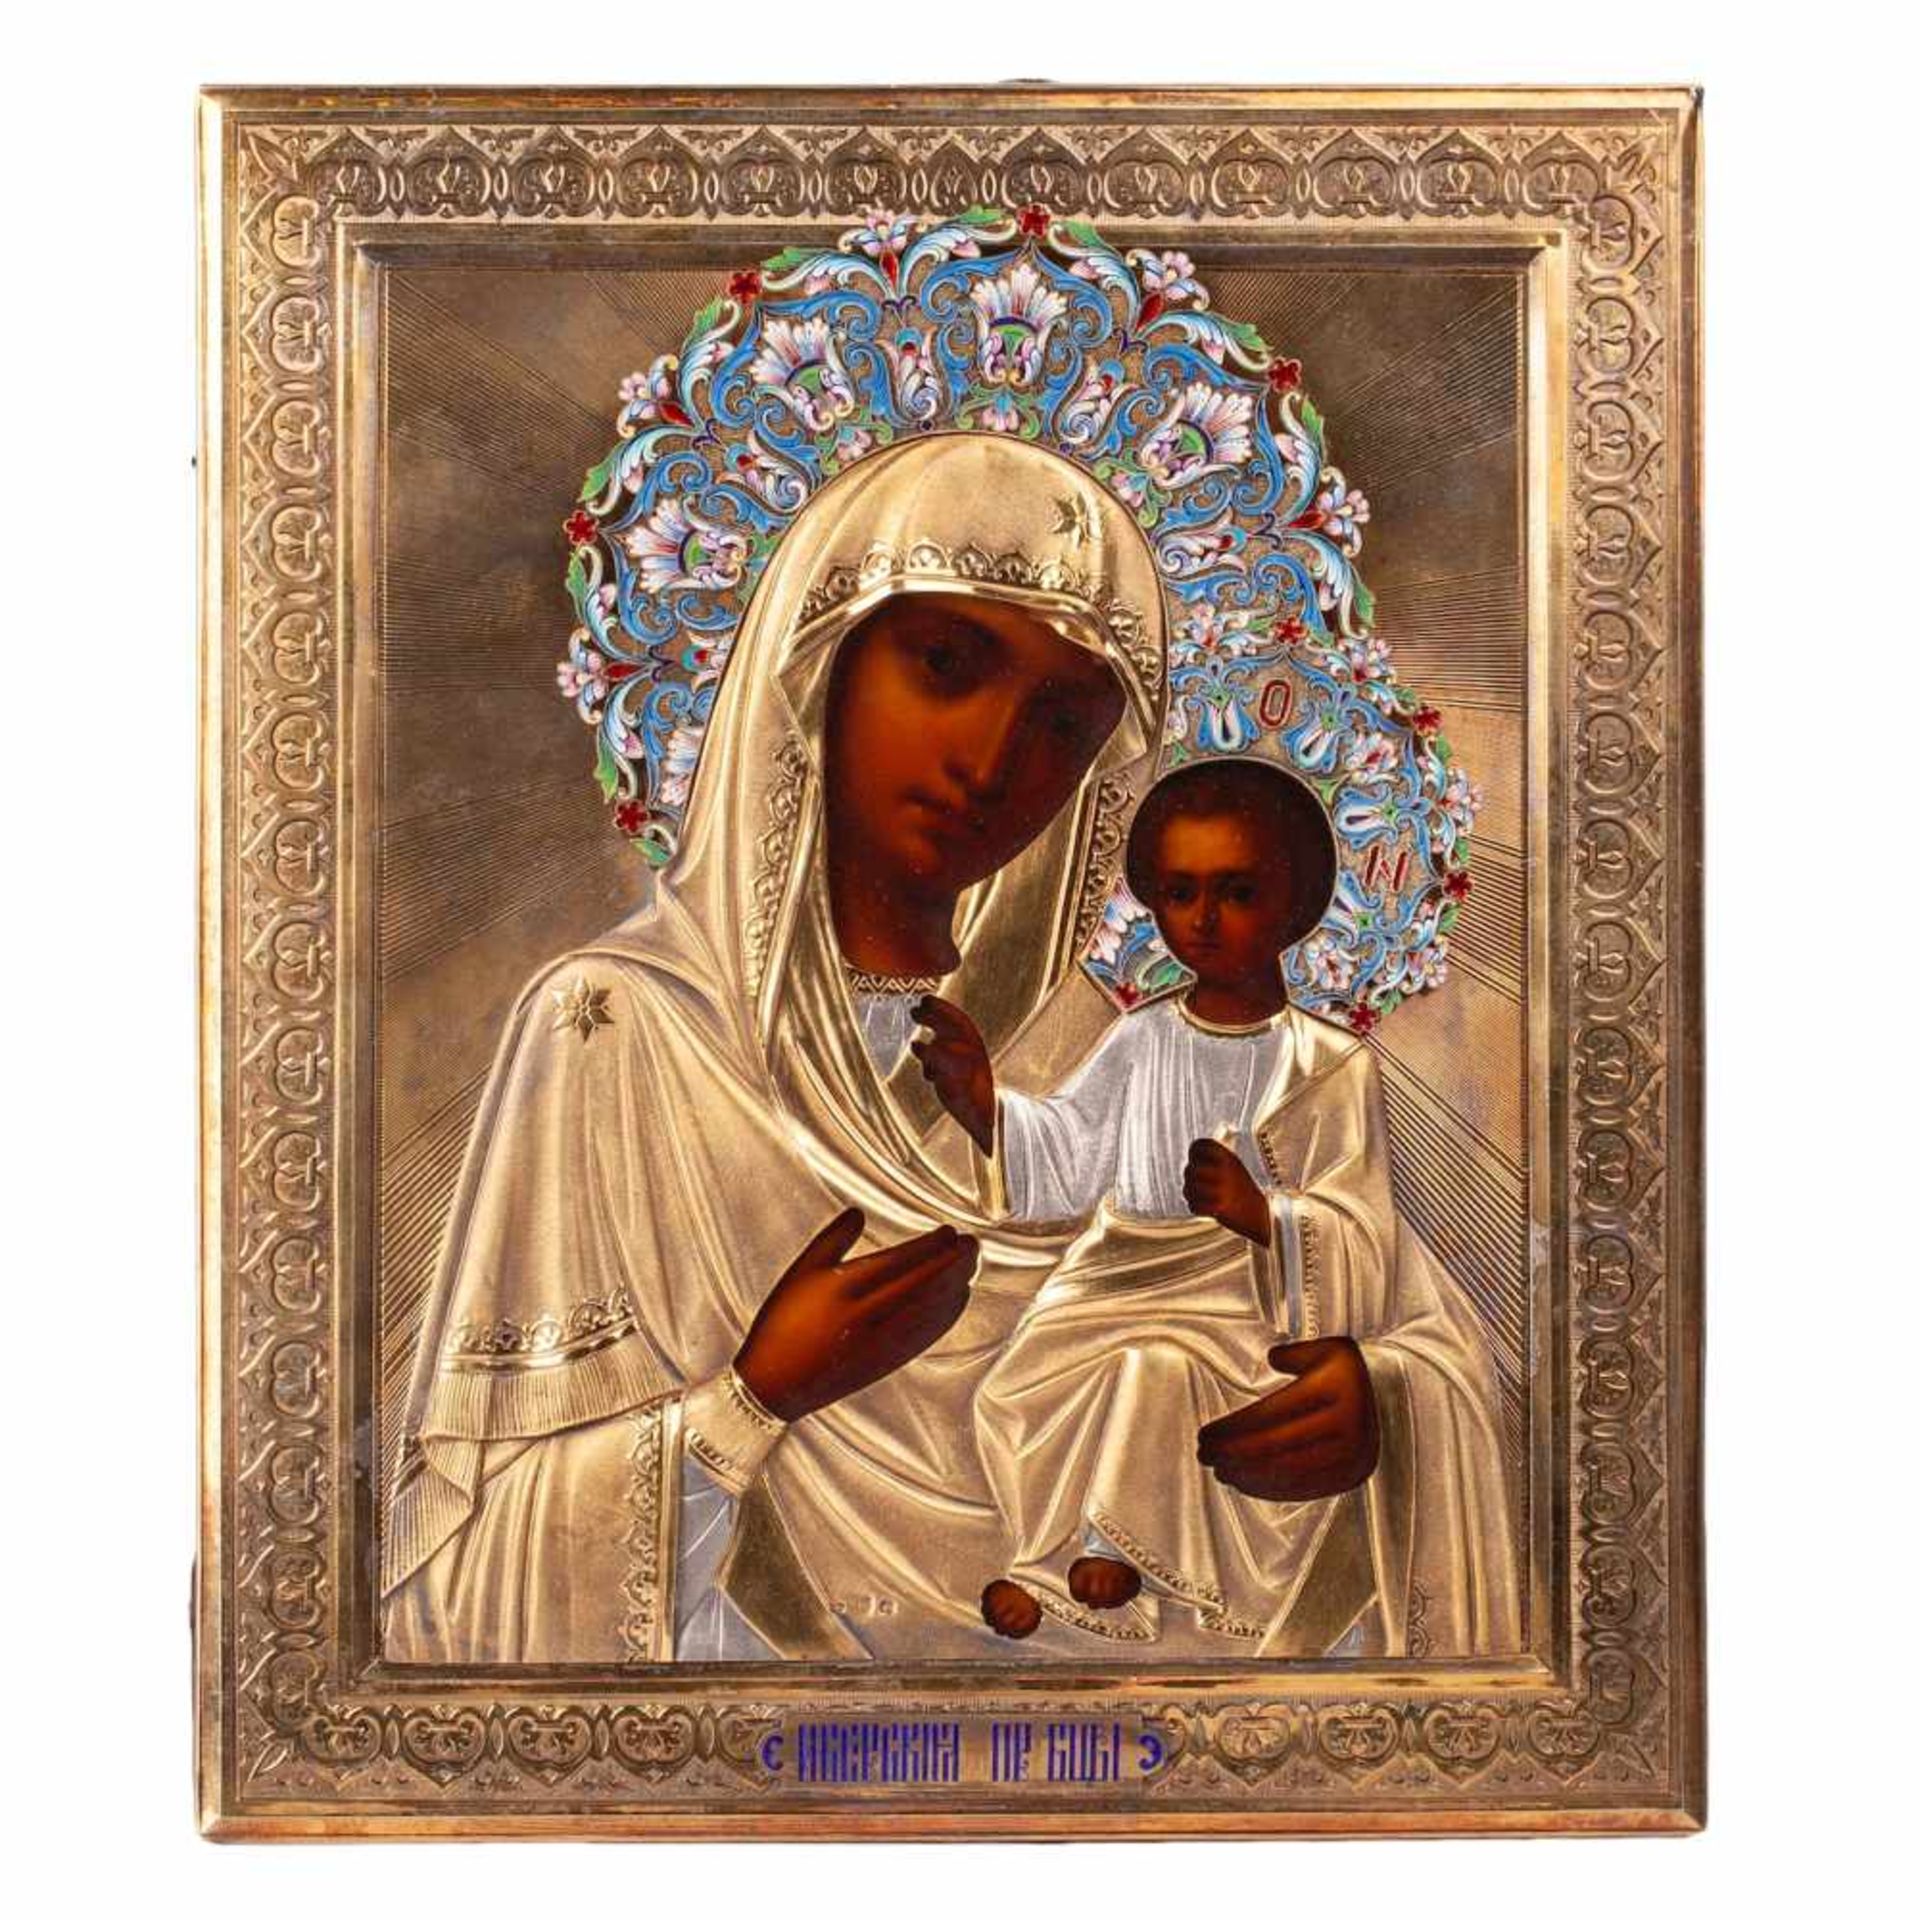 Russian icon of the Iverskaya Mother of GodRussian icon of the Iverskaya Mother of God. Oil on wood.